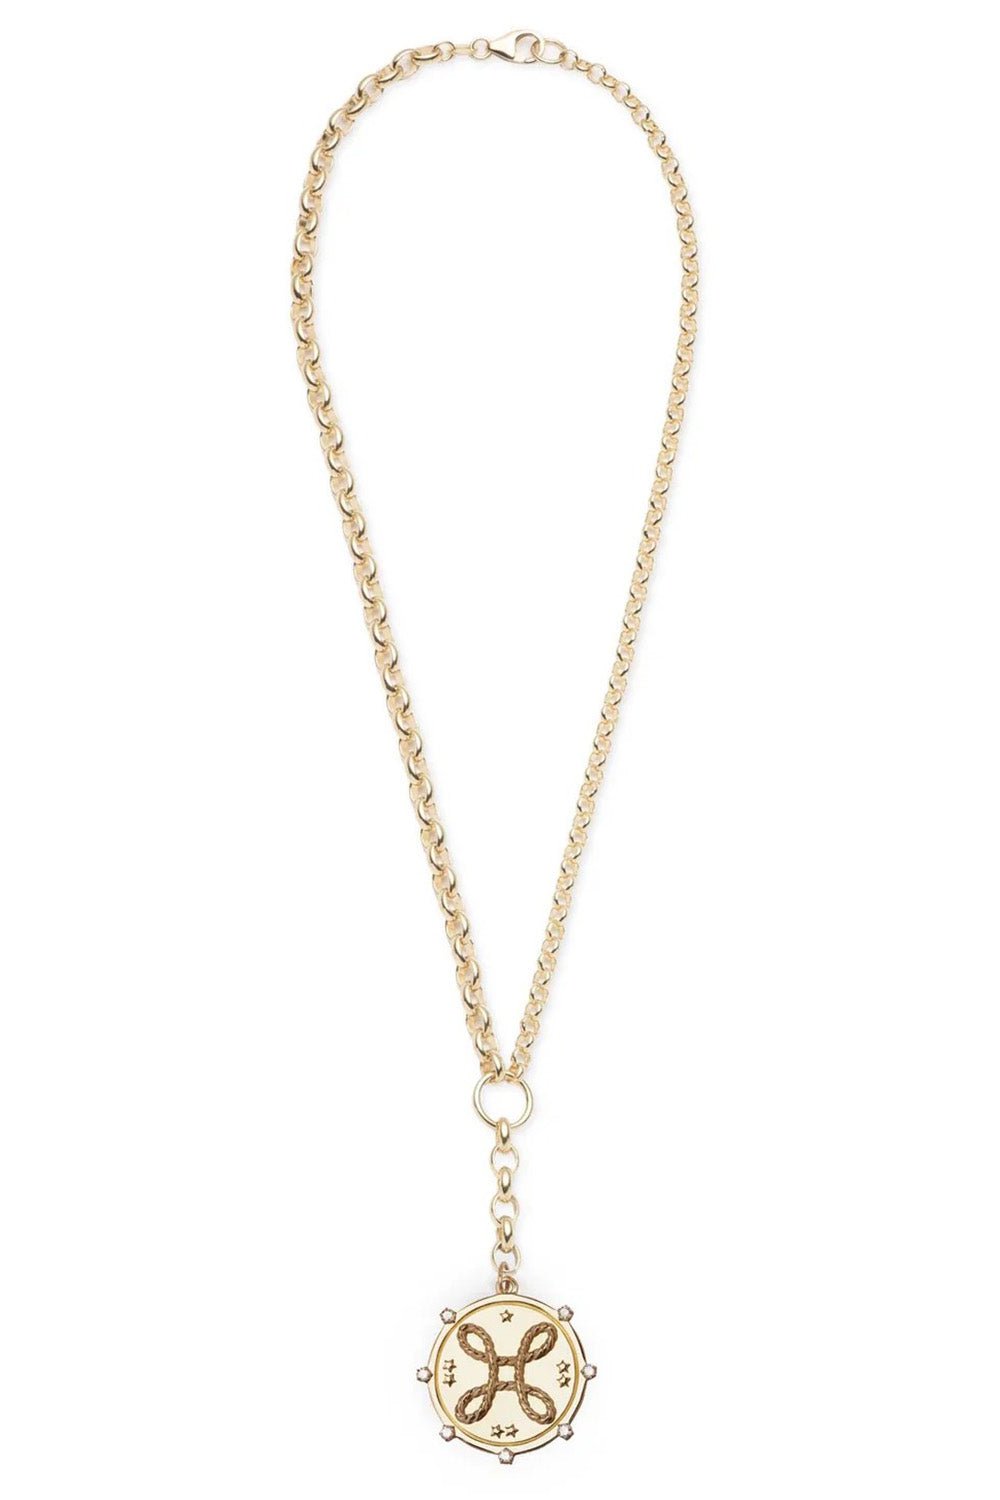 FOUNDRAE-Large Love Belcher Necklace-YELLOW GOLD